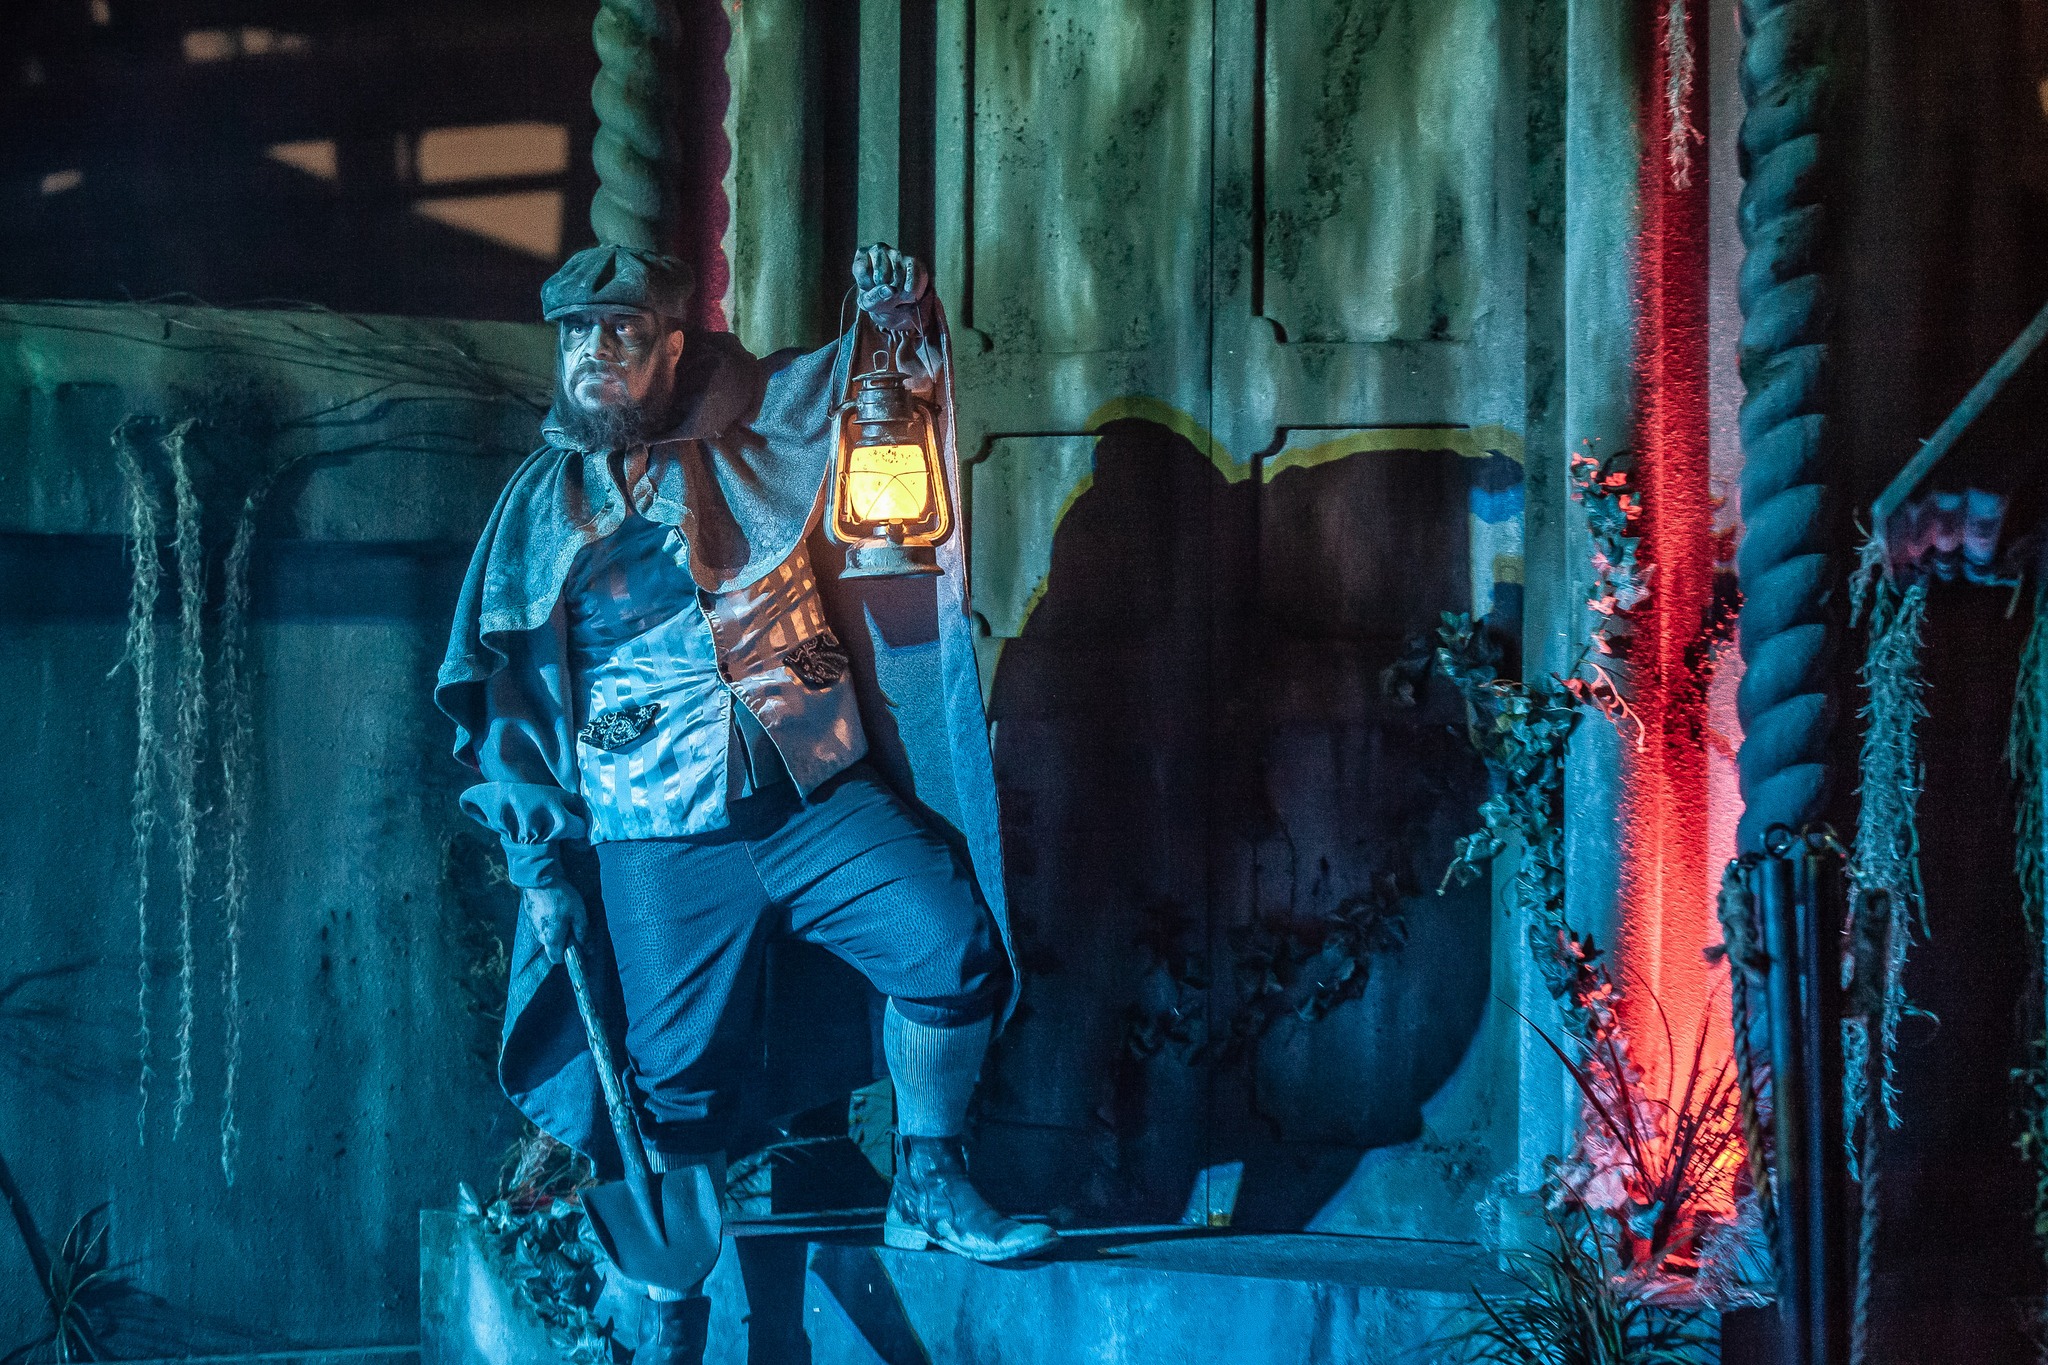 The gravedigger is the busiest person at Knott's Scary Farm